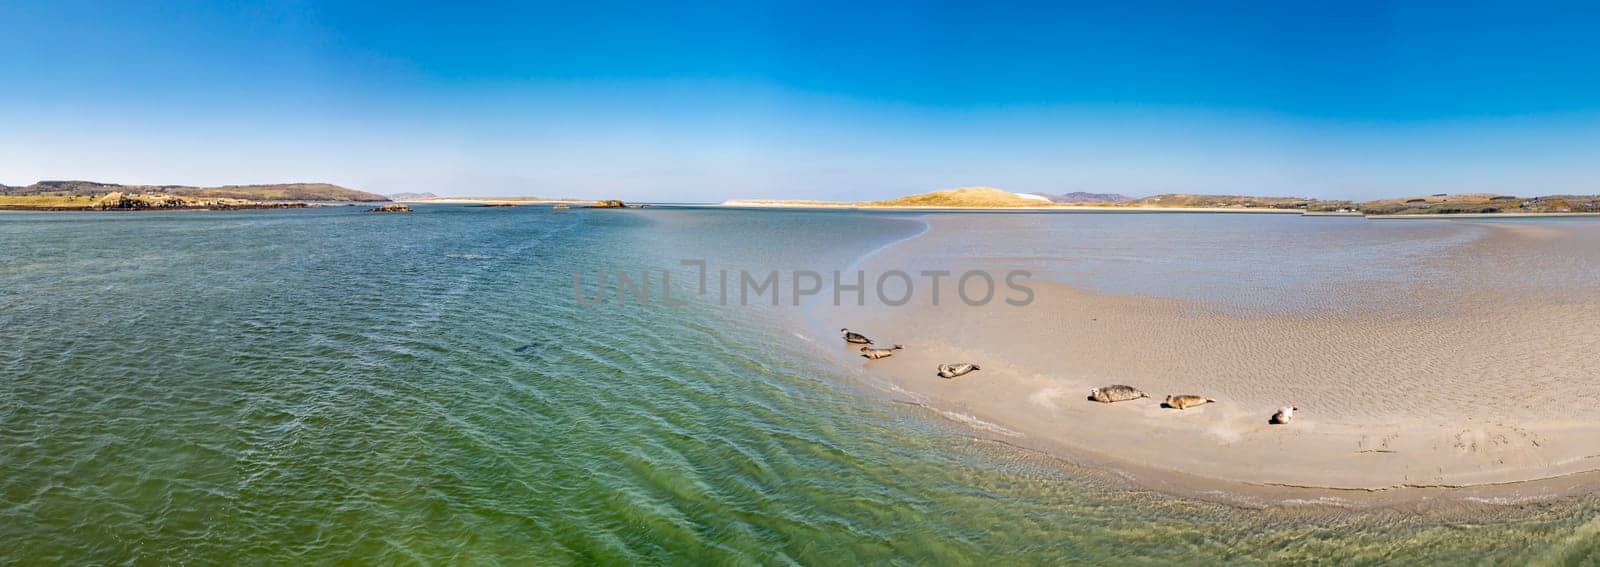 Seals swimming and and resting at Gweebarra bay - County Donegal, Ireland.